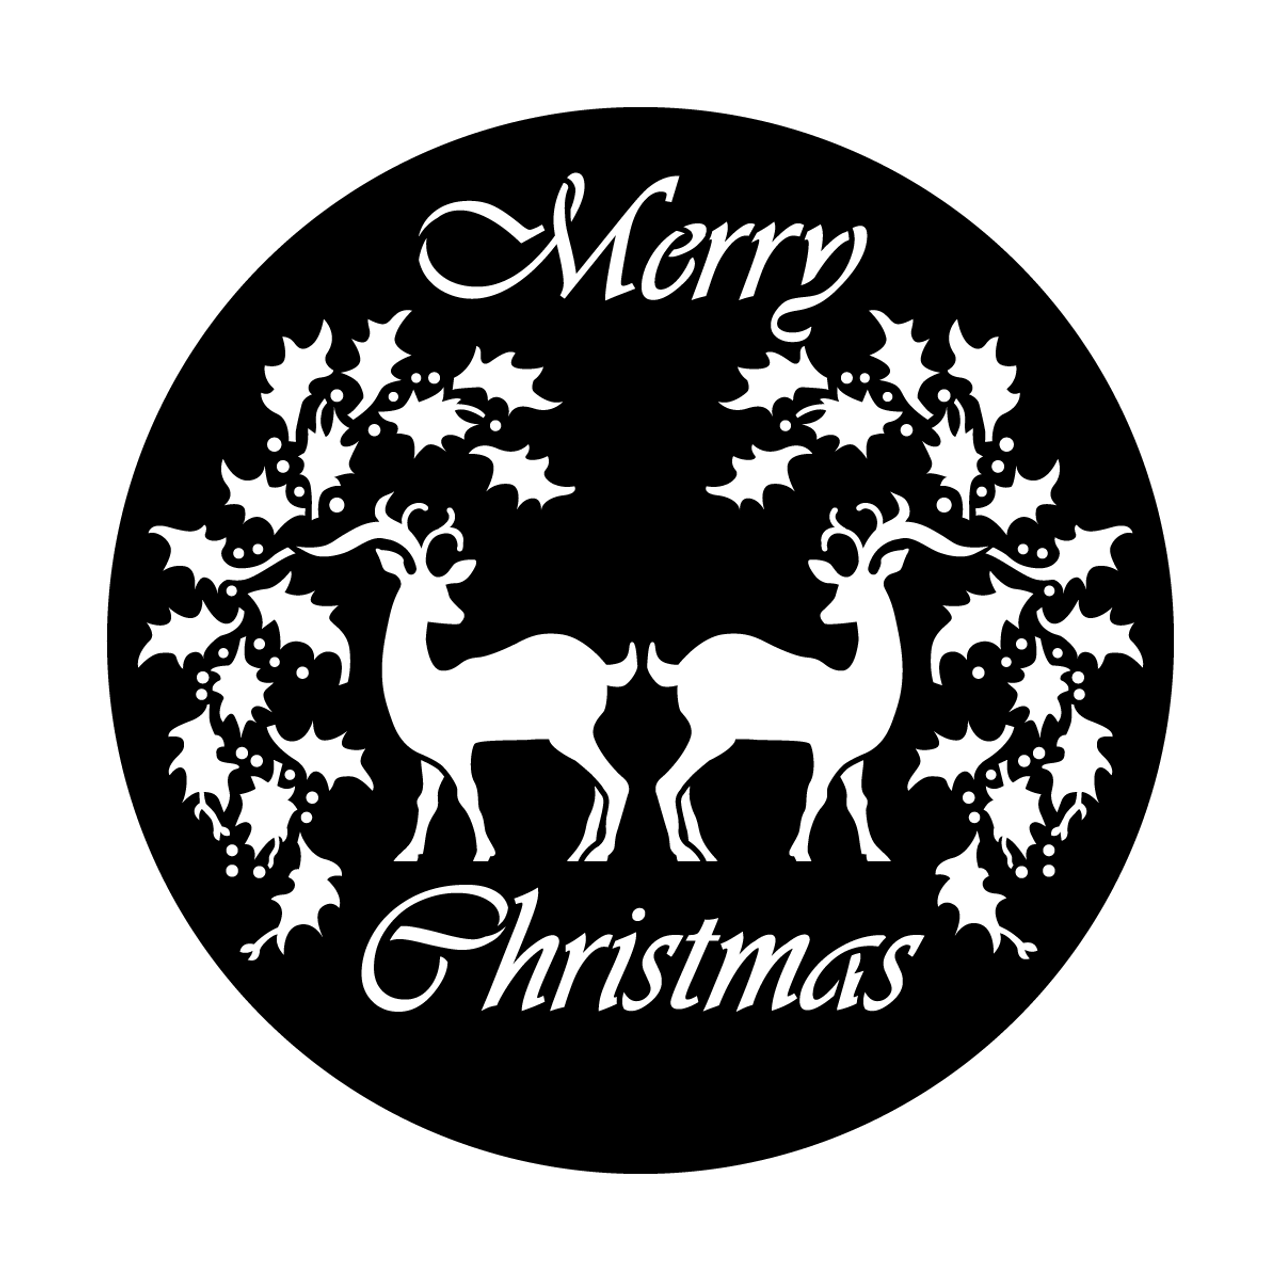 https://cdn11.bigcommerce.com/s-5ig7x53cx8/images/stencil/1280x1280/products/2986/18818/ME-4238-Christmas-Reindeer__95679.1641408372.png?c=2